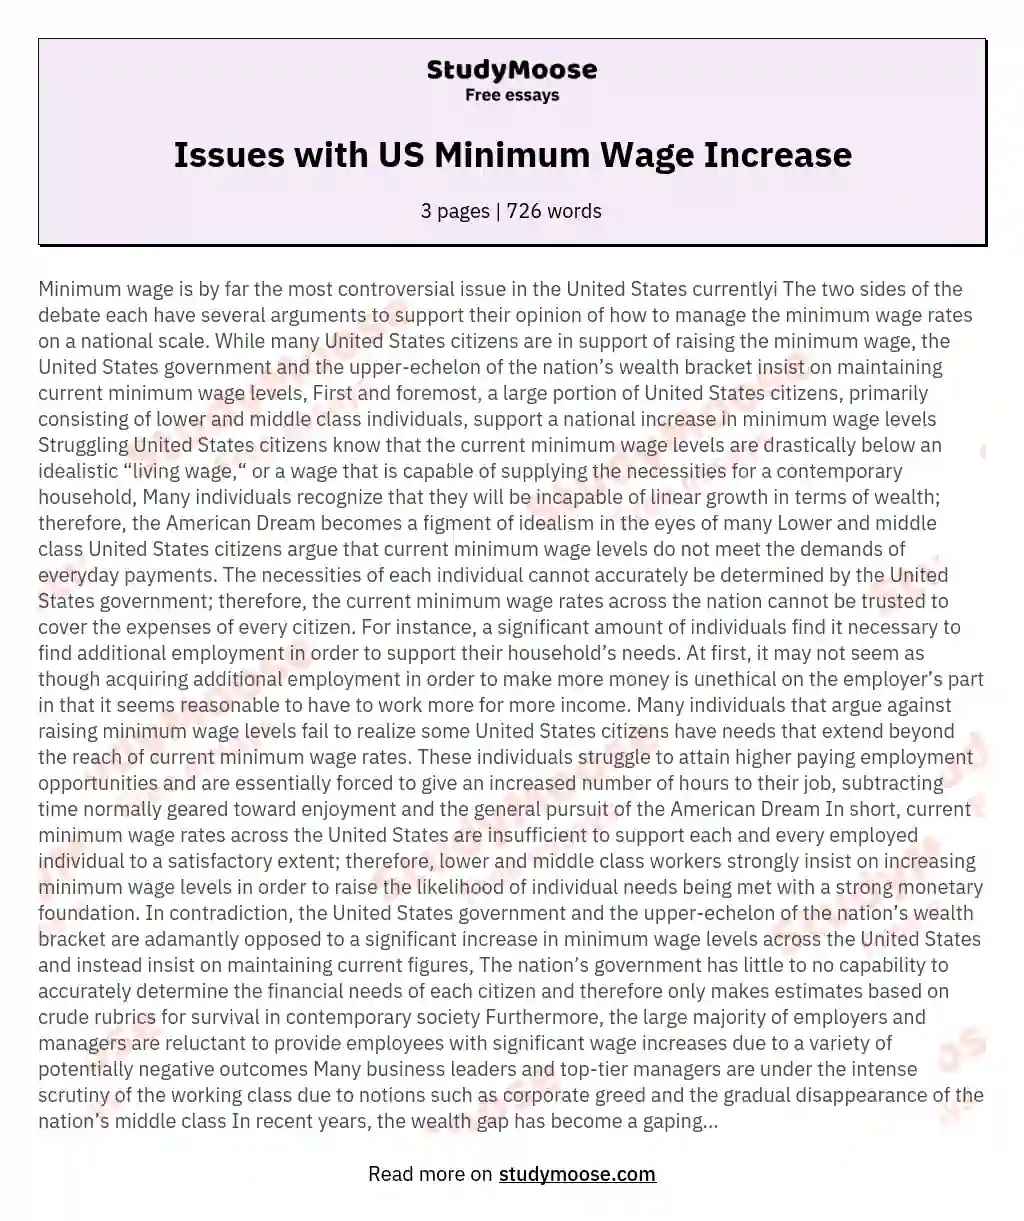 Issues with US Minimum Wage Increase essay